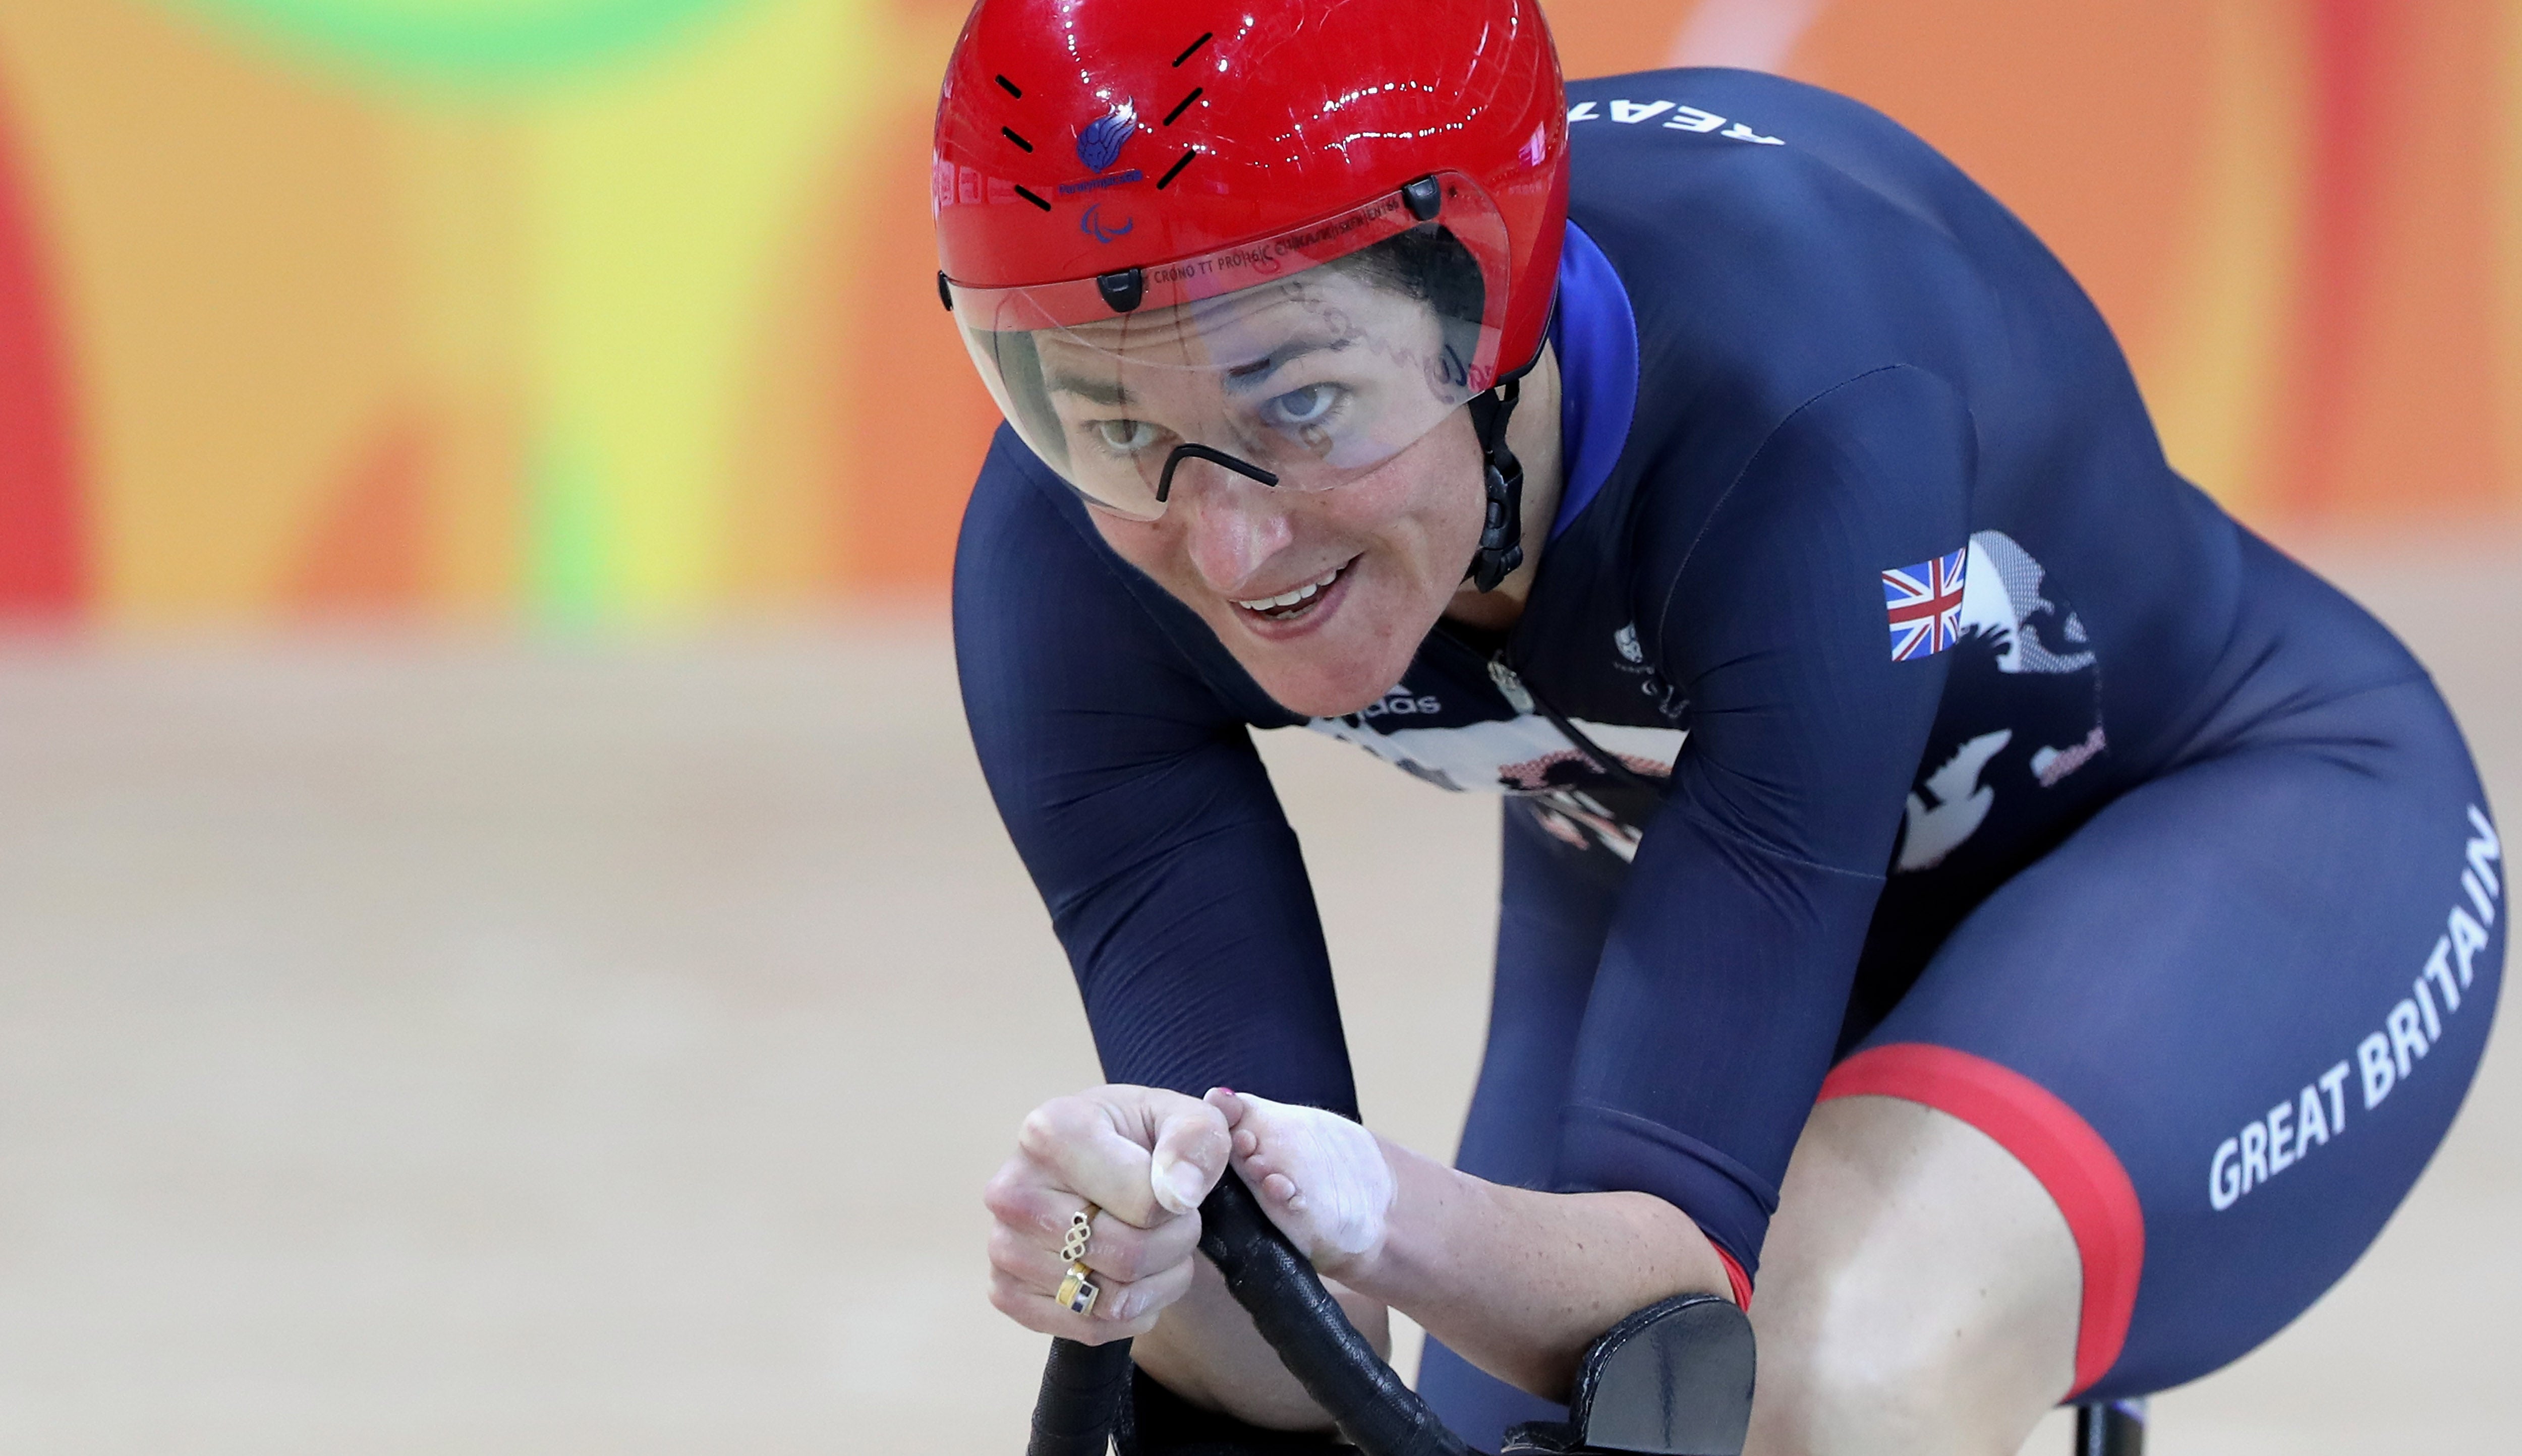 Great Britain’s Sarah Storey is competing in the C5 individual pursuit, C5 time trial and C4-5 road race events in Tokyo